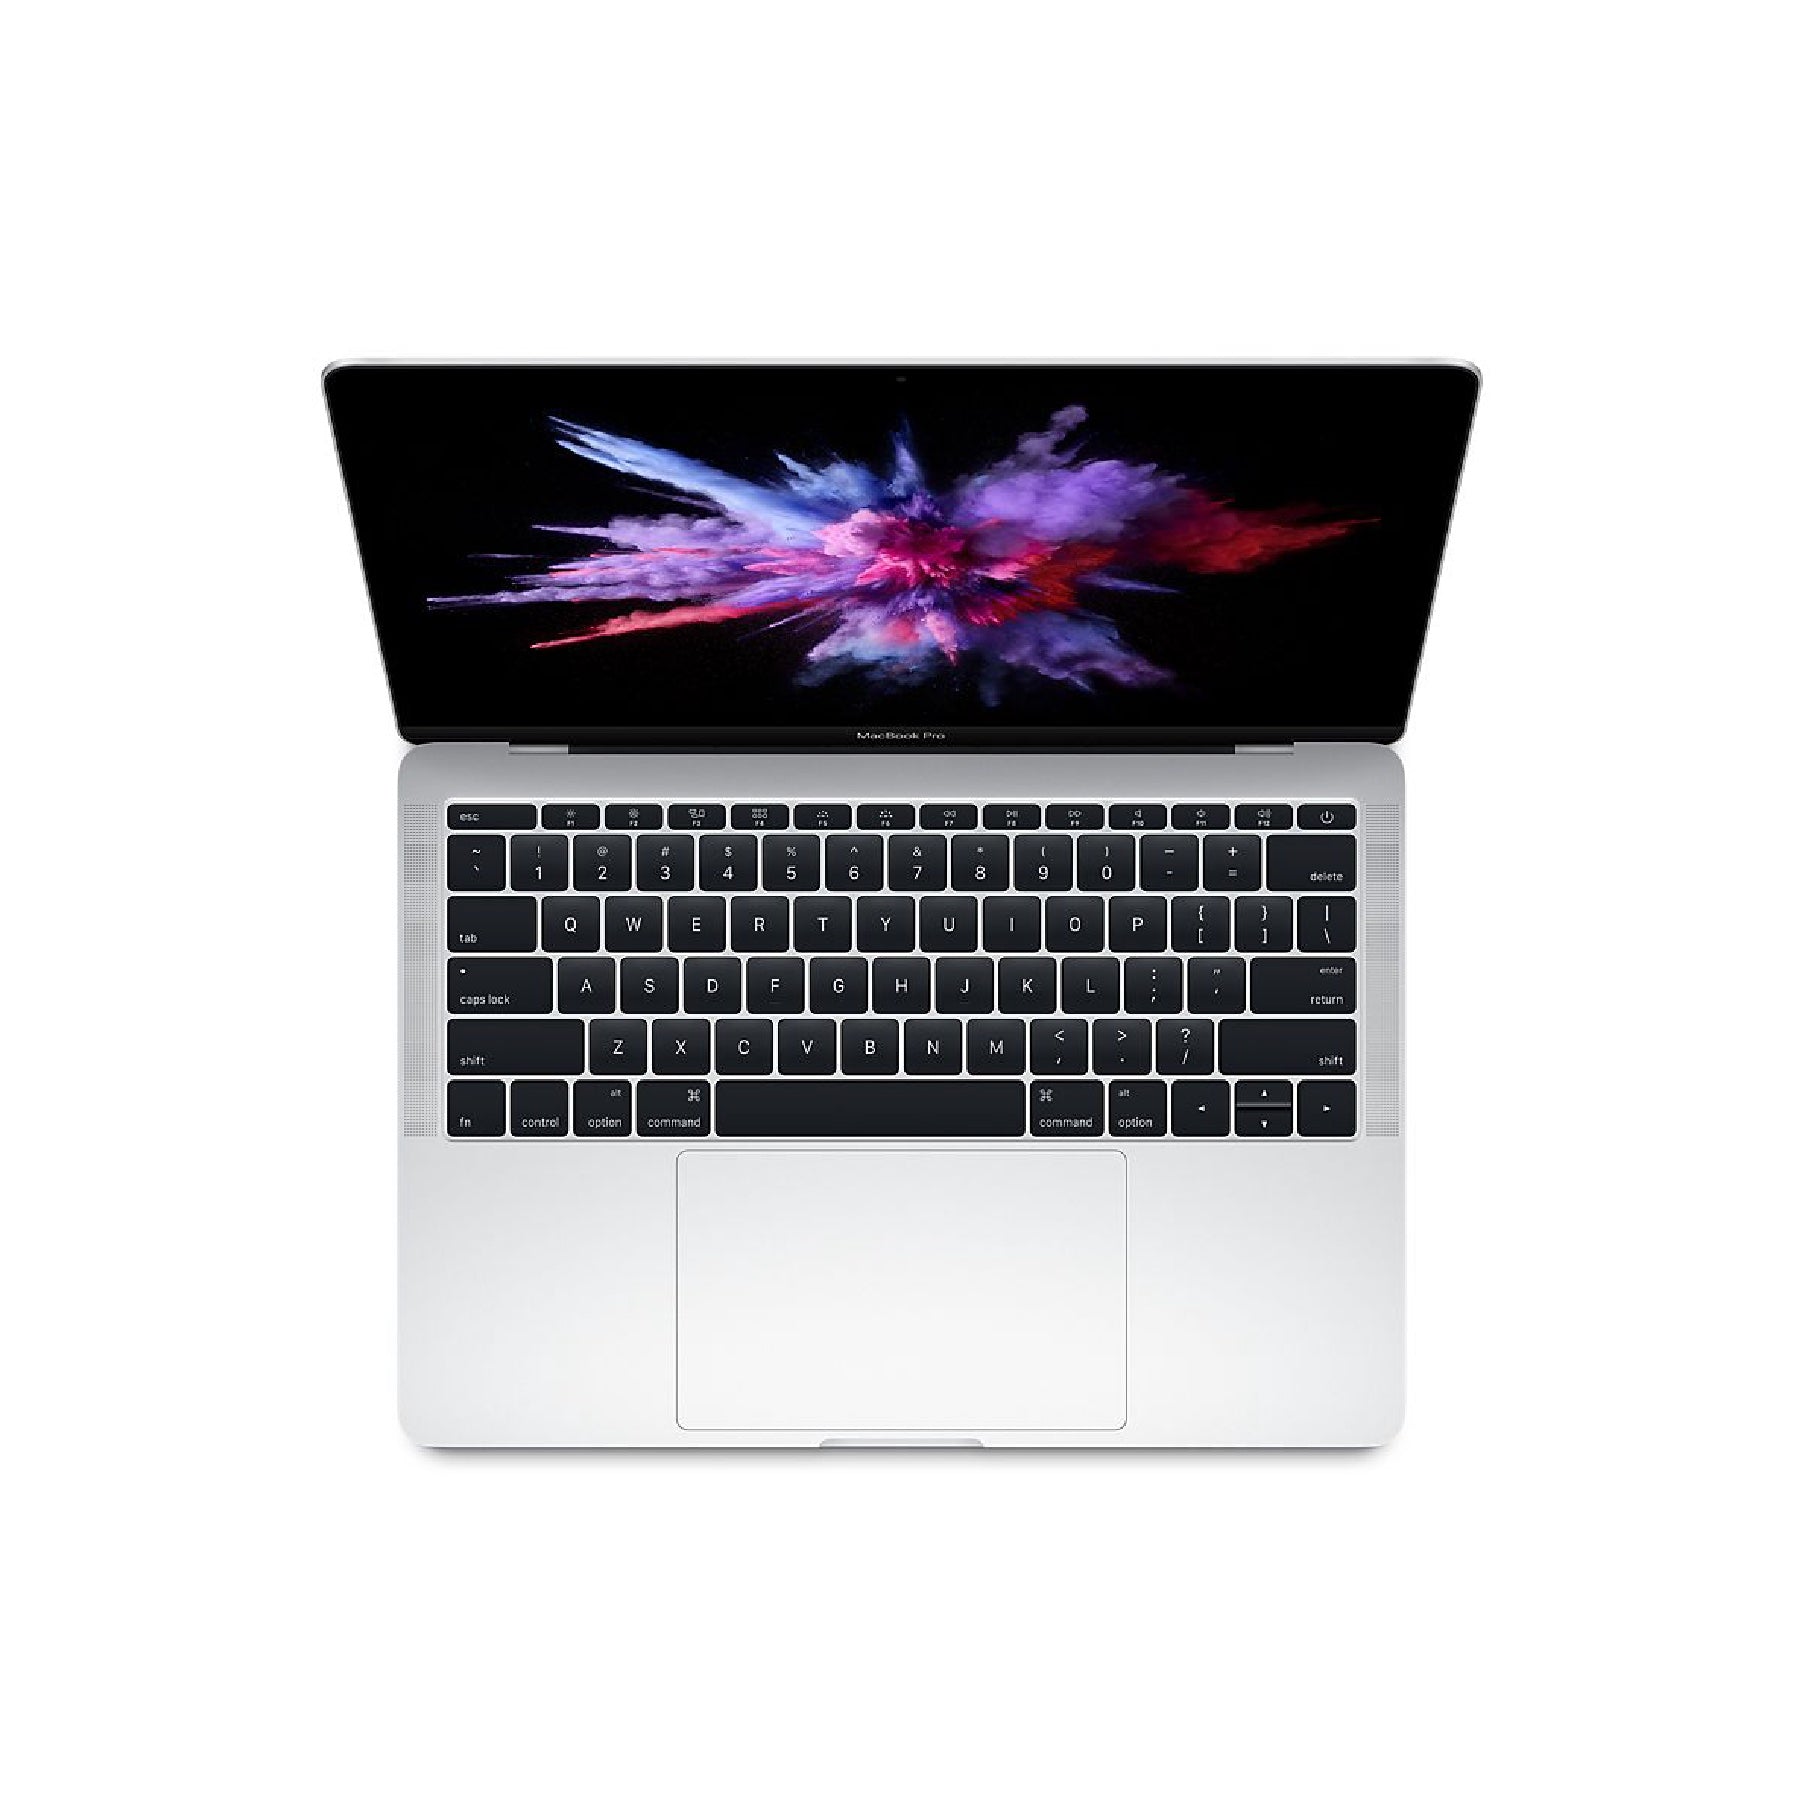 MacBook Pro (13-inch, 2017, Two Thunderbolt 3 ports) 2.3GHz, Intel Cor